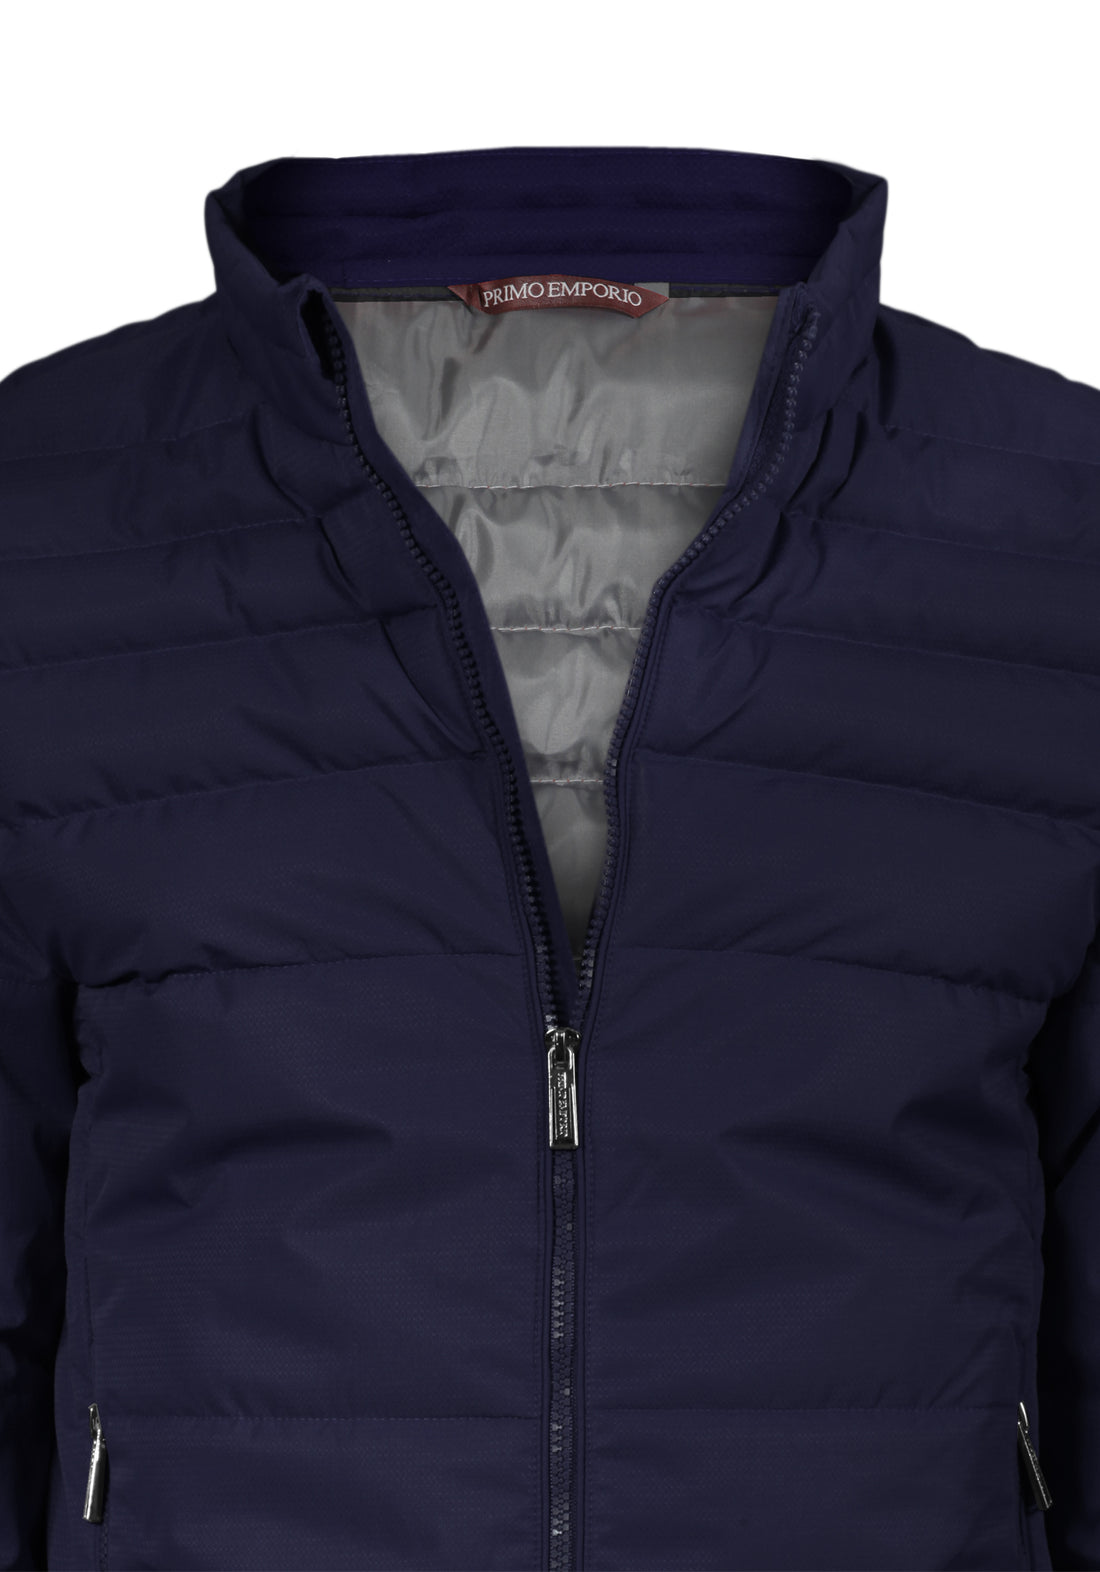 Short down jacket with zip closure - Blue -